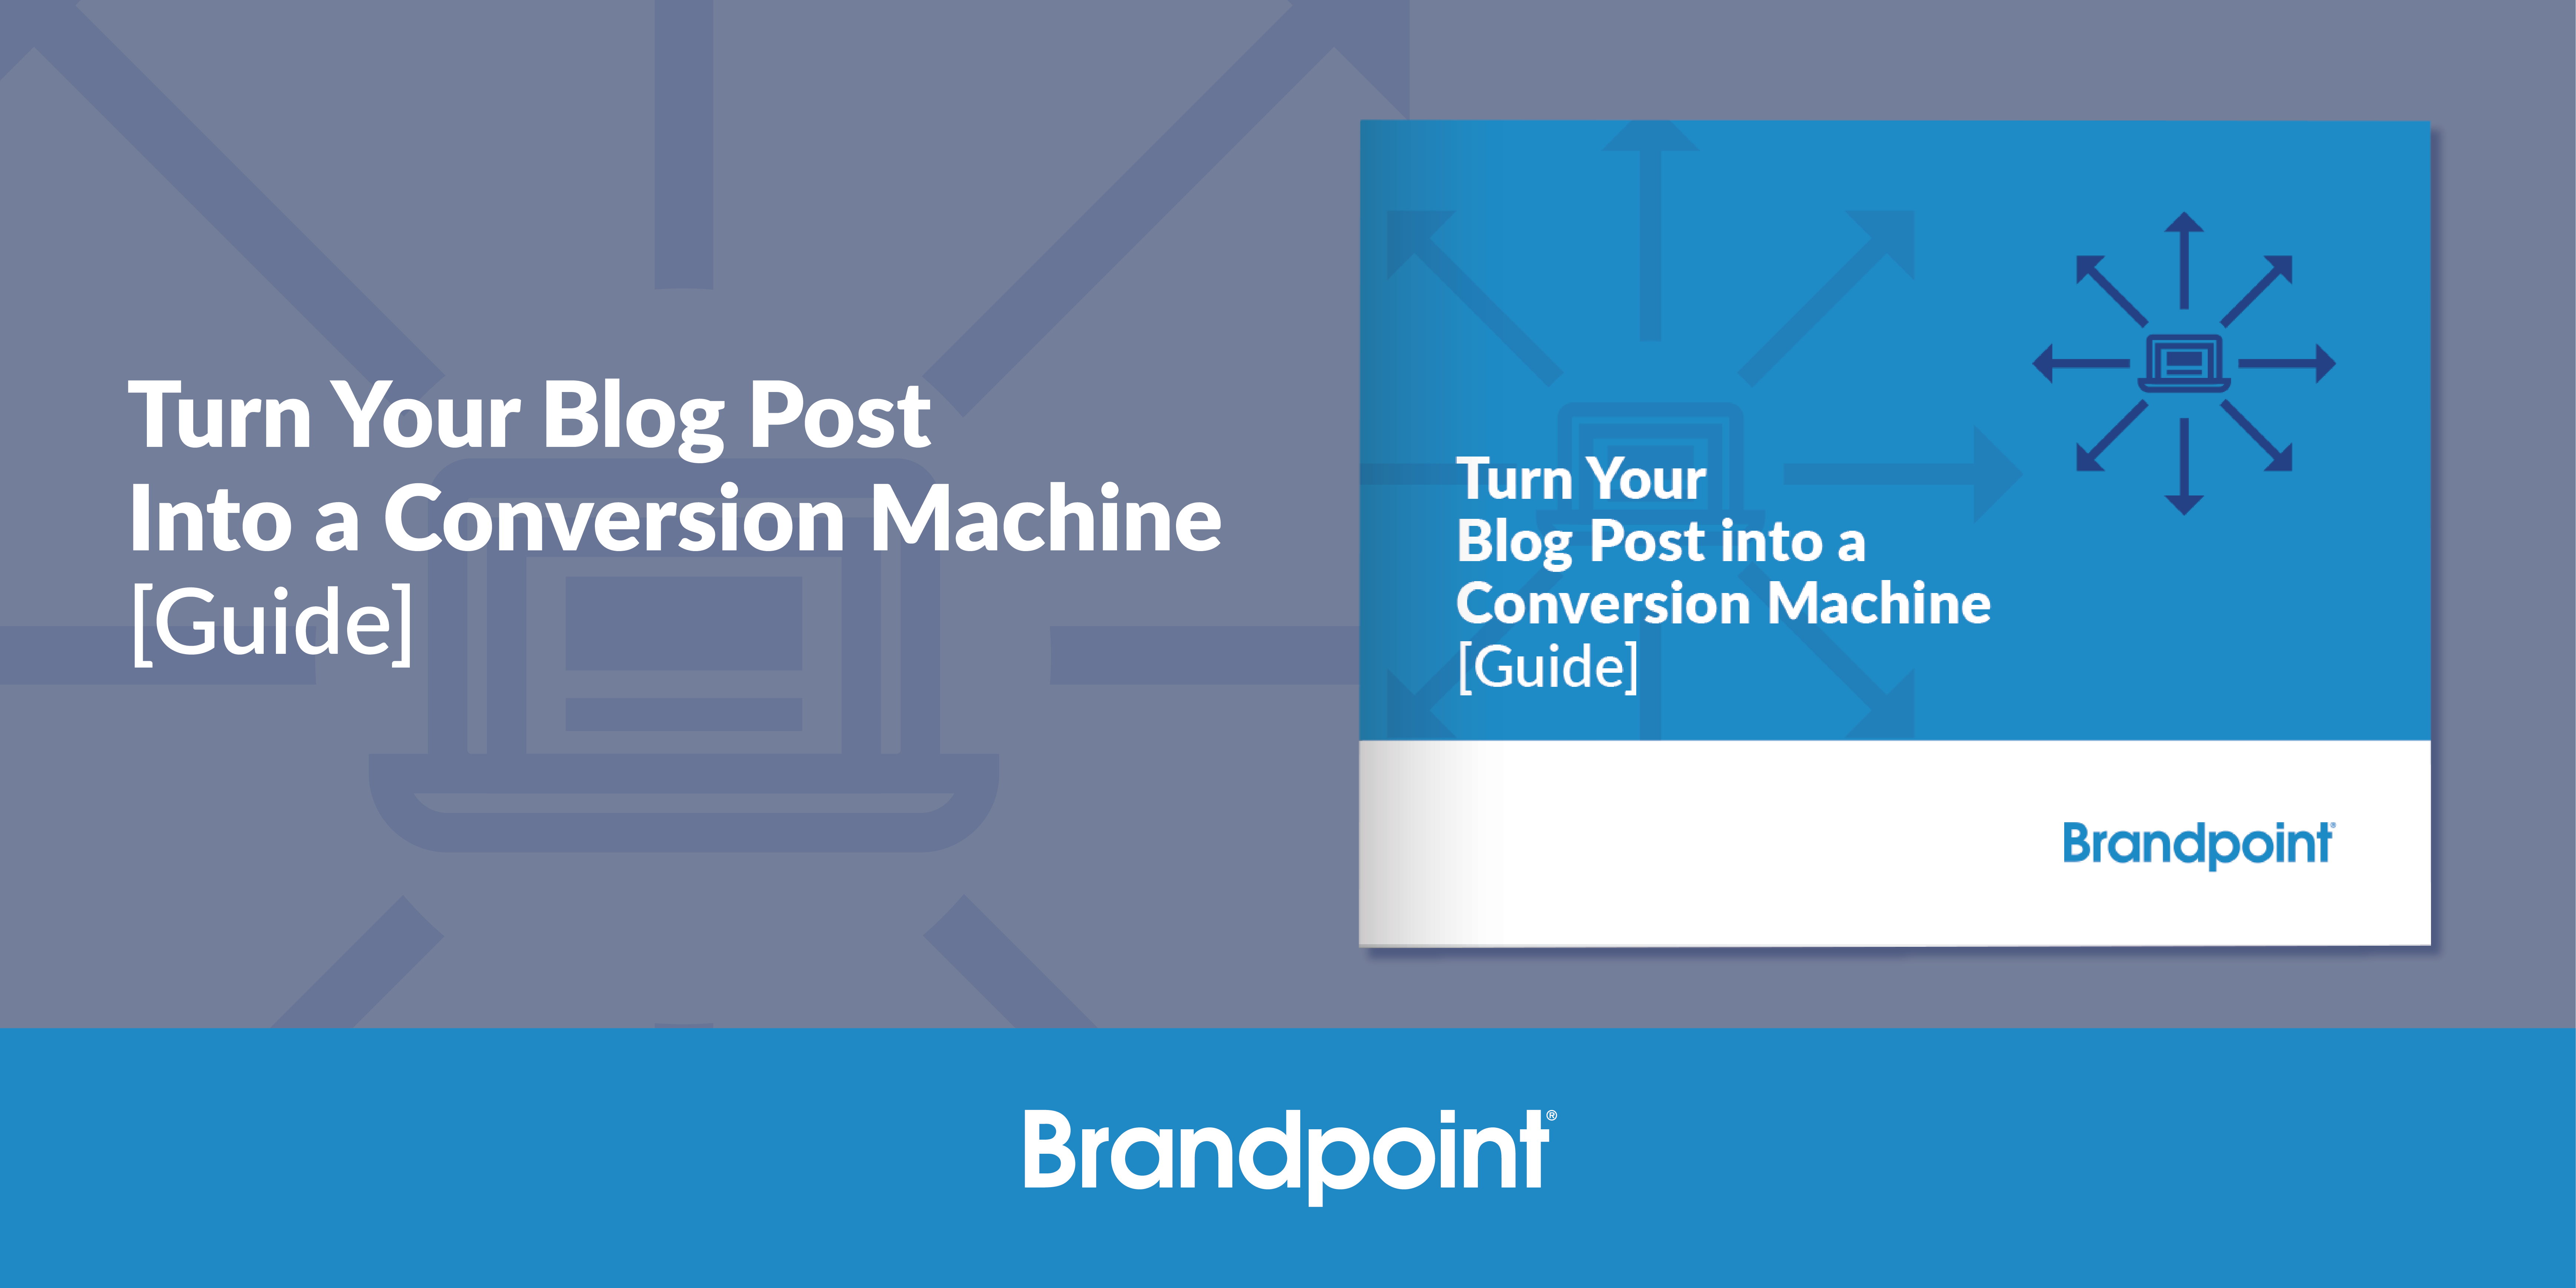 Turn your blog into a conversion machine